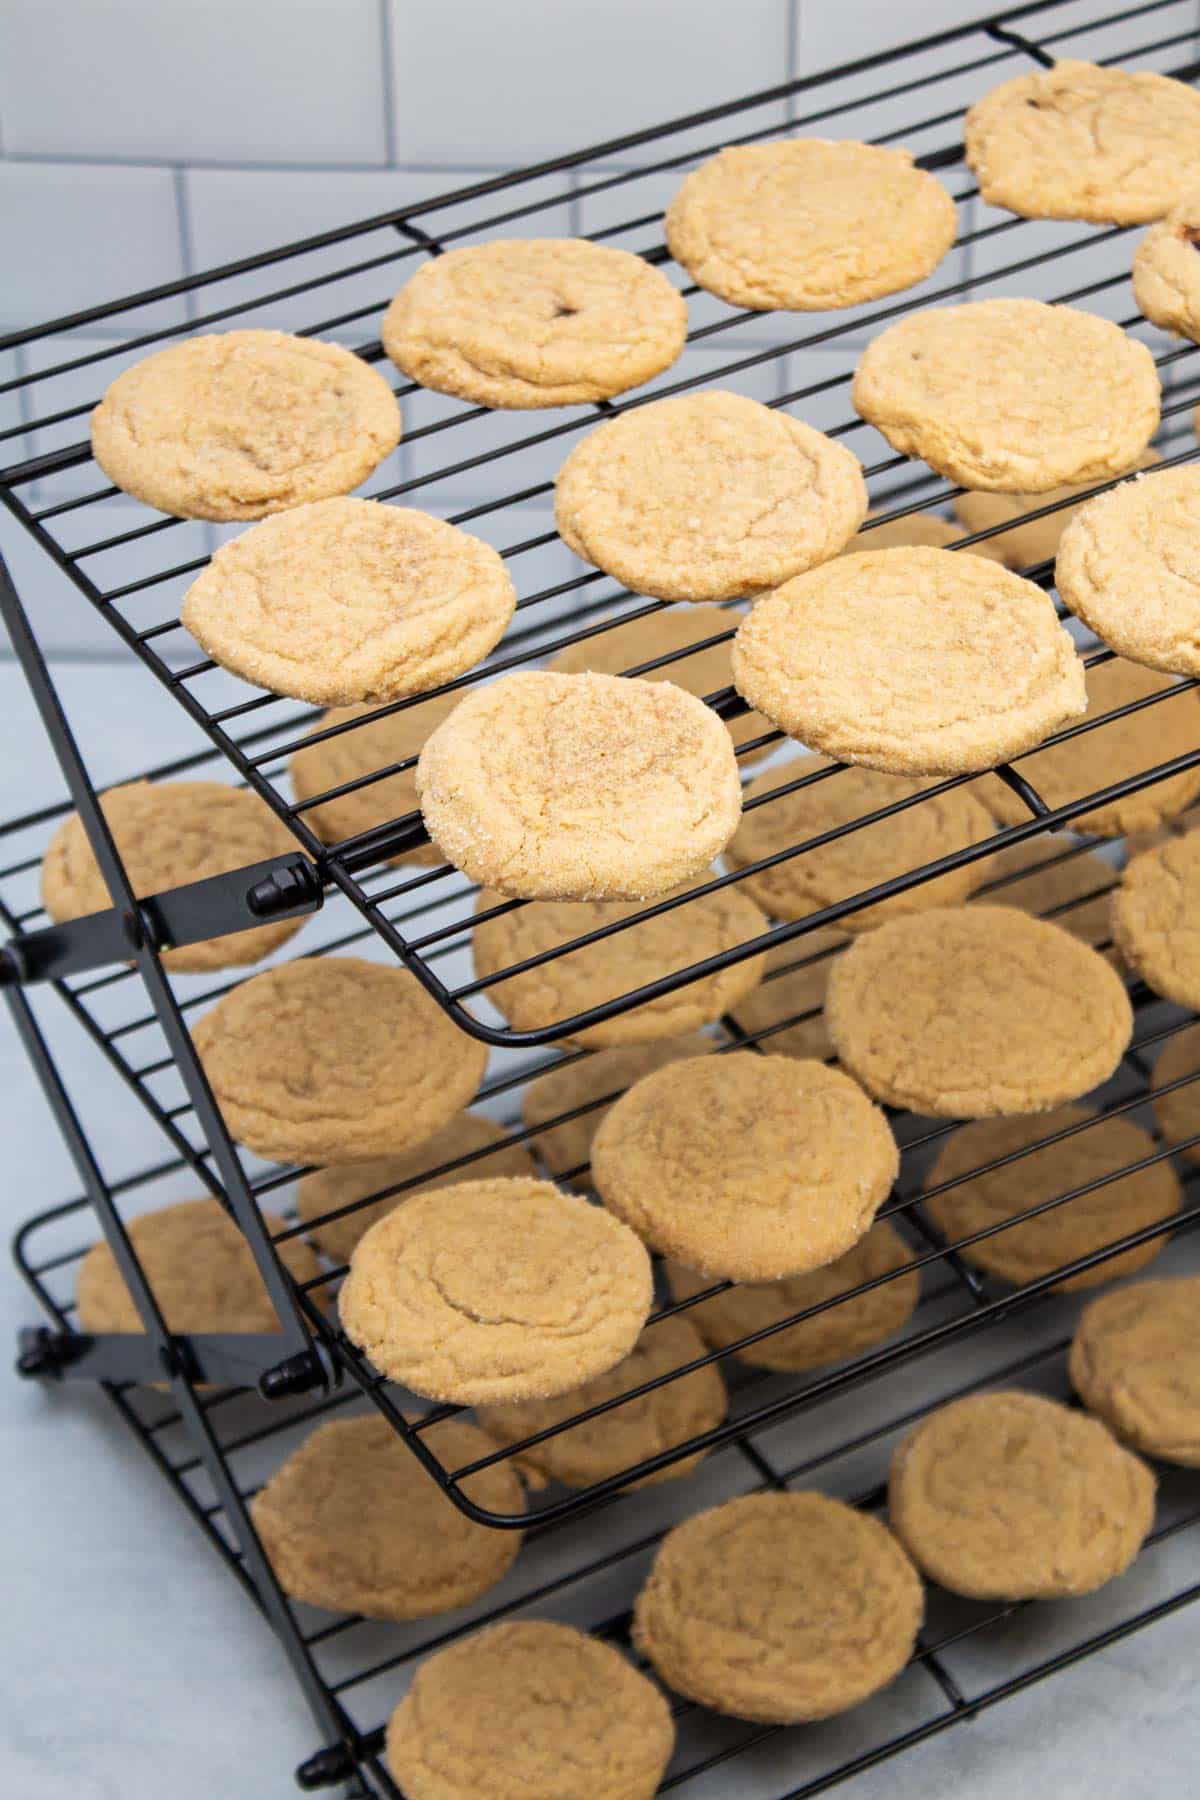 Three tiers of cooling racks filled with freshly baked cookies.